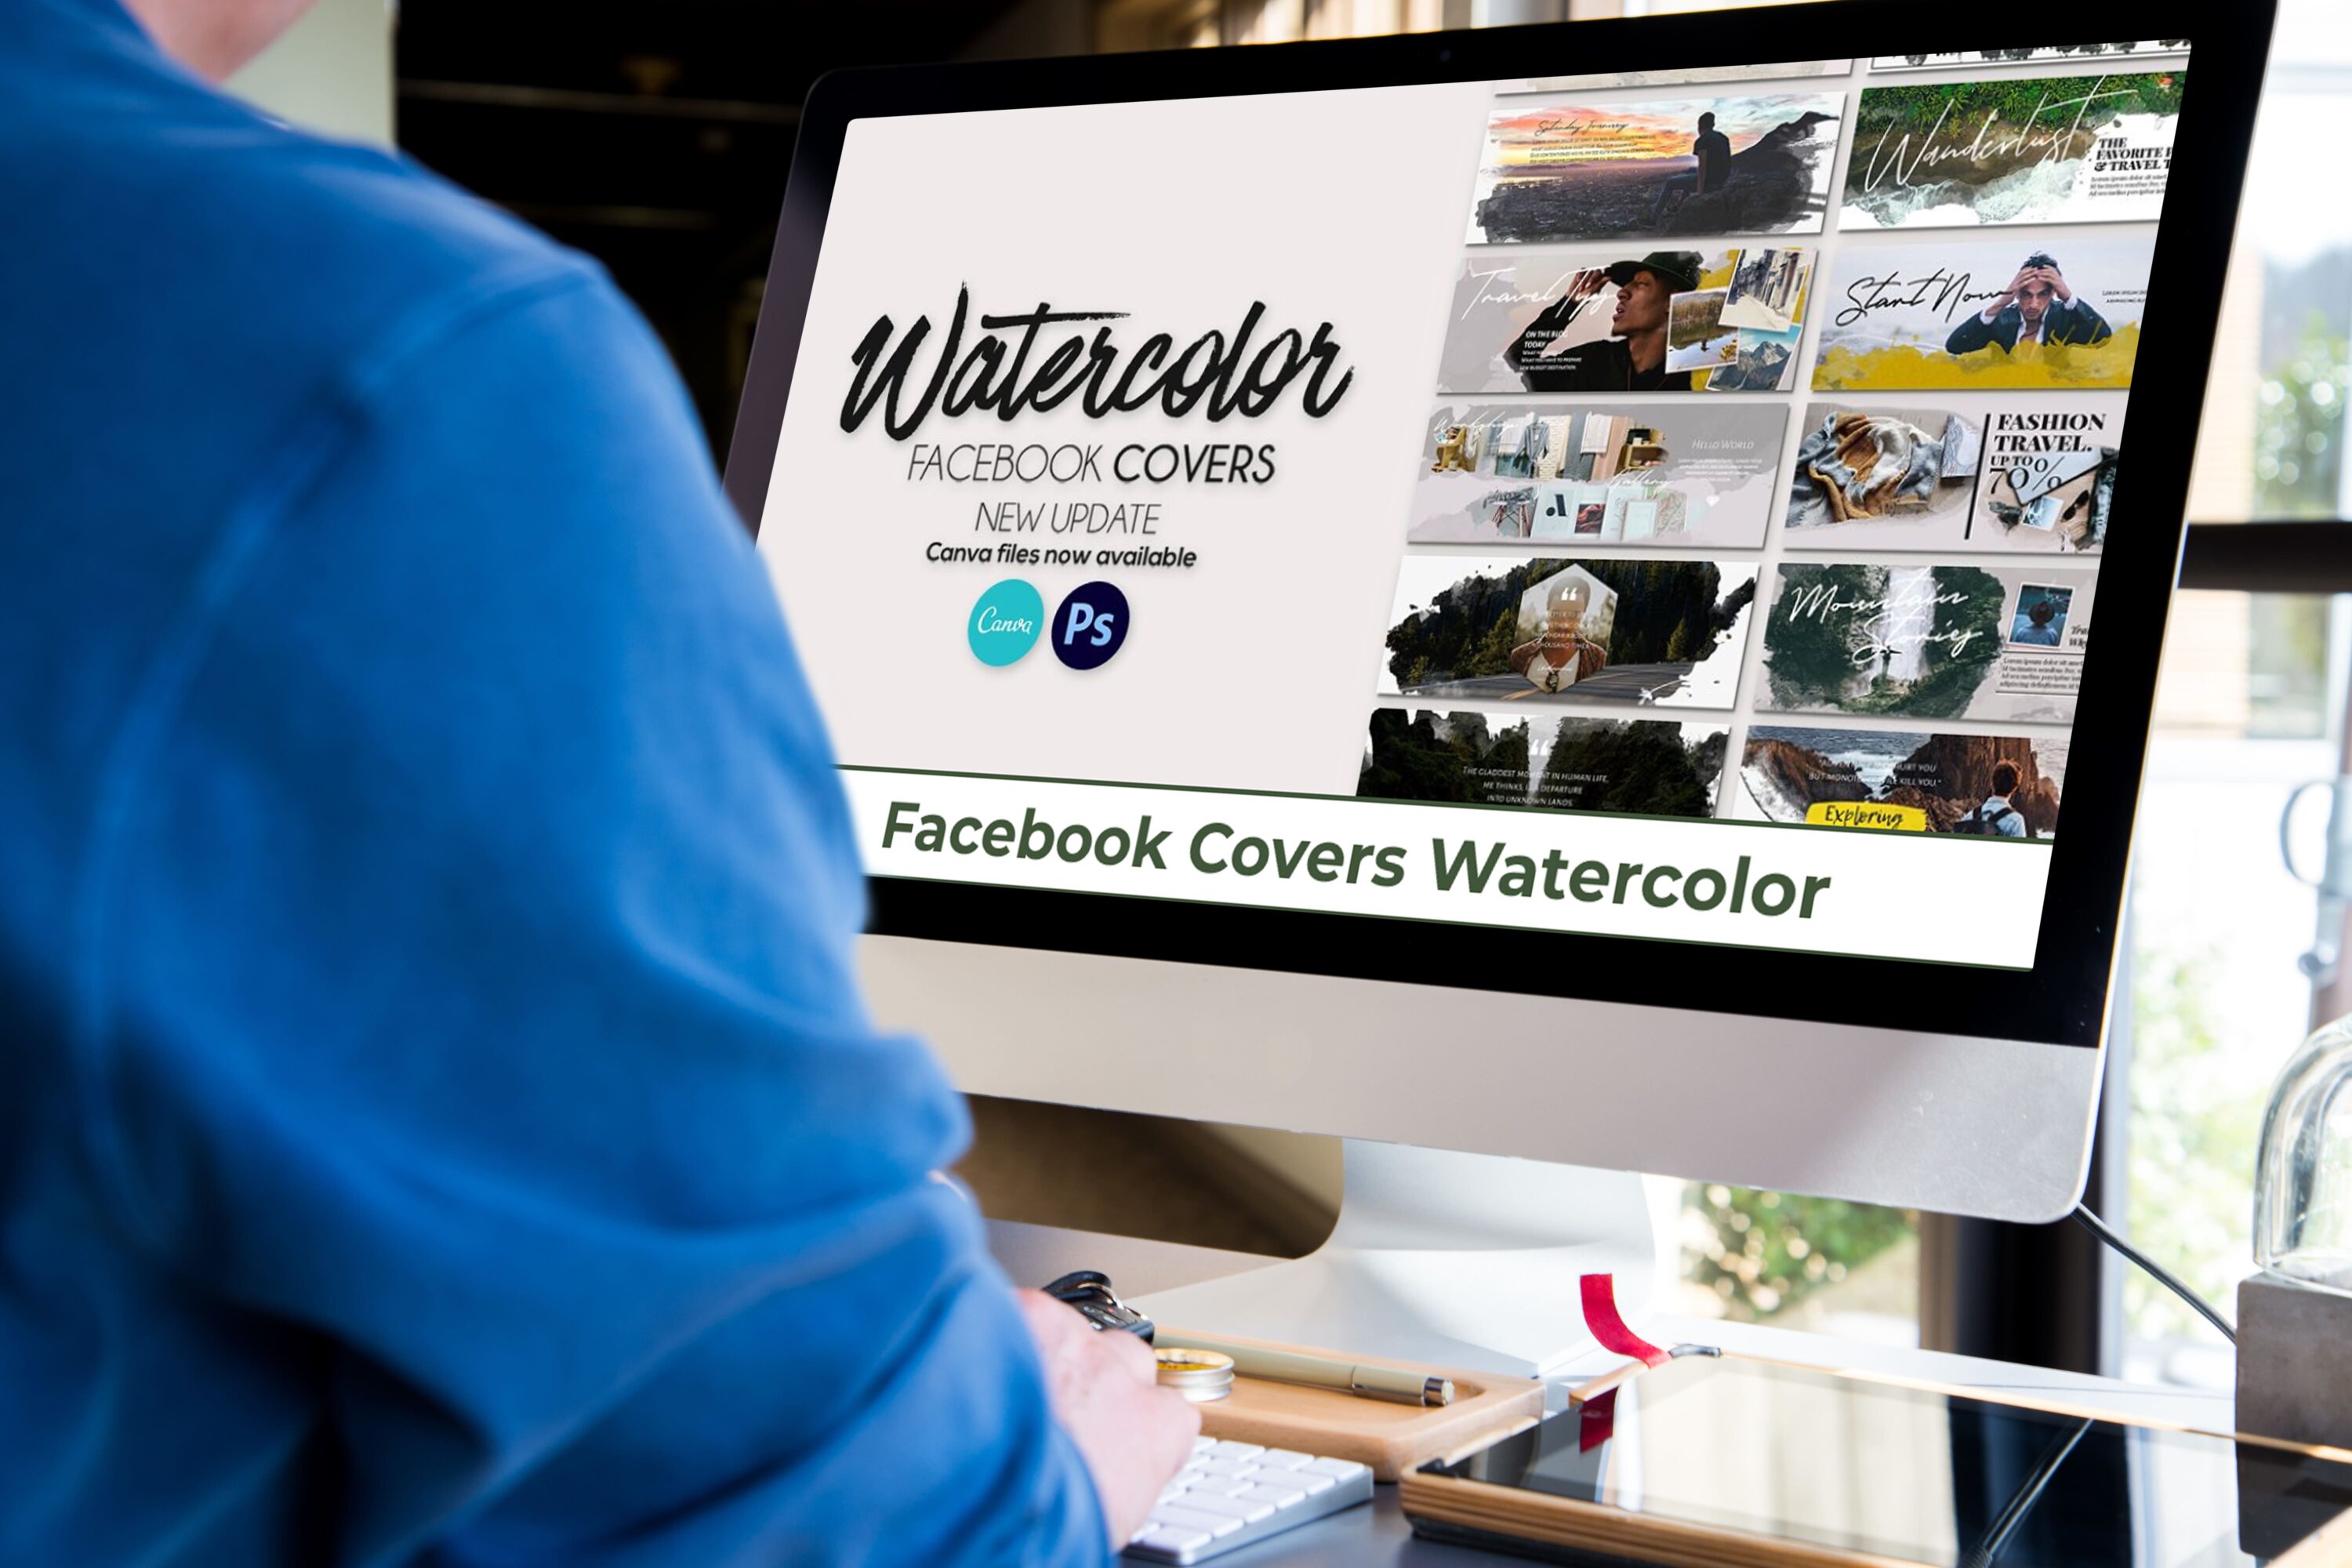 Desktop option of the Facebook Covers Watercolor.